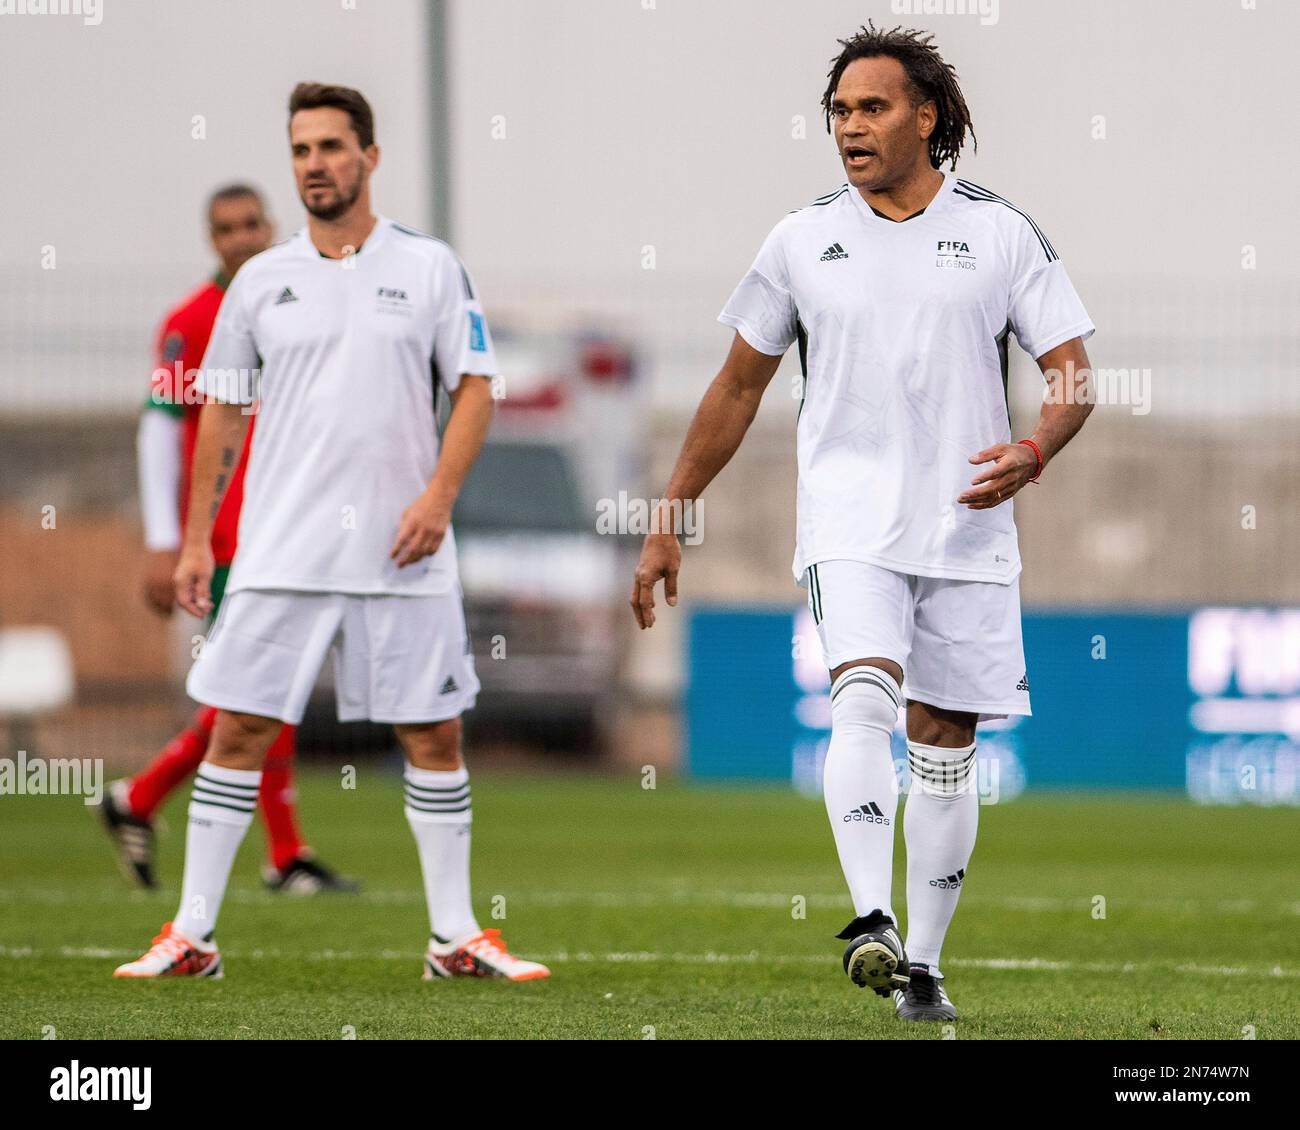 February 10, 2023, rabat, Rabat-Sale-Kenitra, Morocco Estadio Prince Moulay Hassan Christian Karembeu during a match between FIFA Morocco Legends and FIFA World Legends, a friendly match during FIFA Club World Cup 2022,